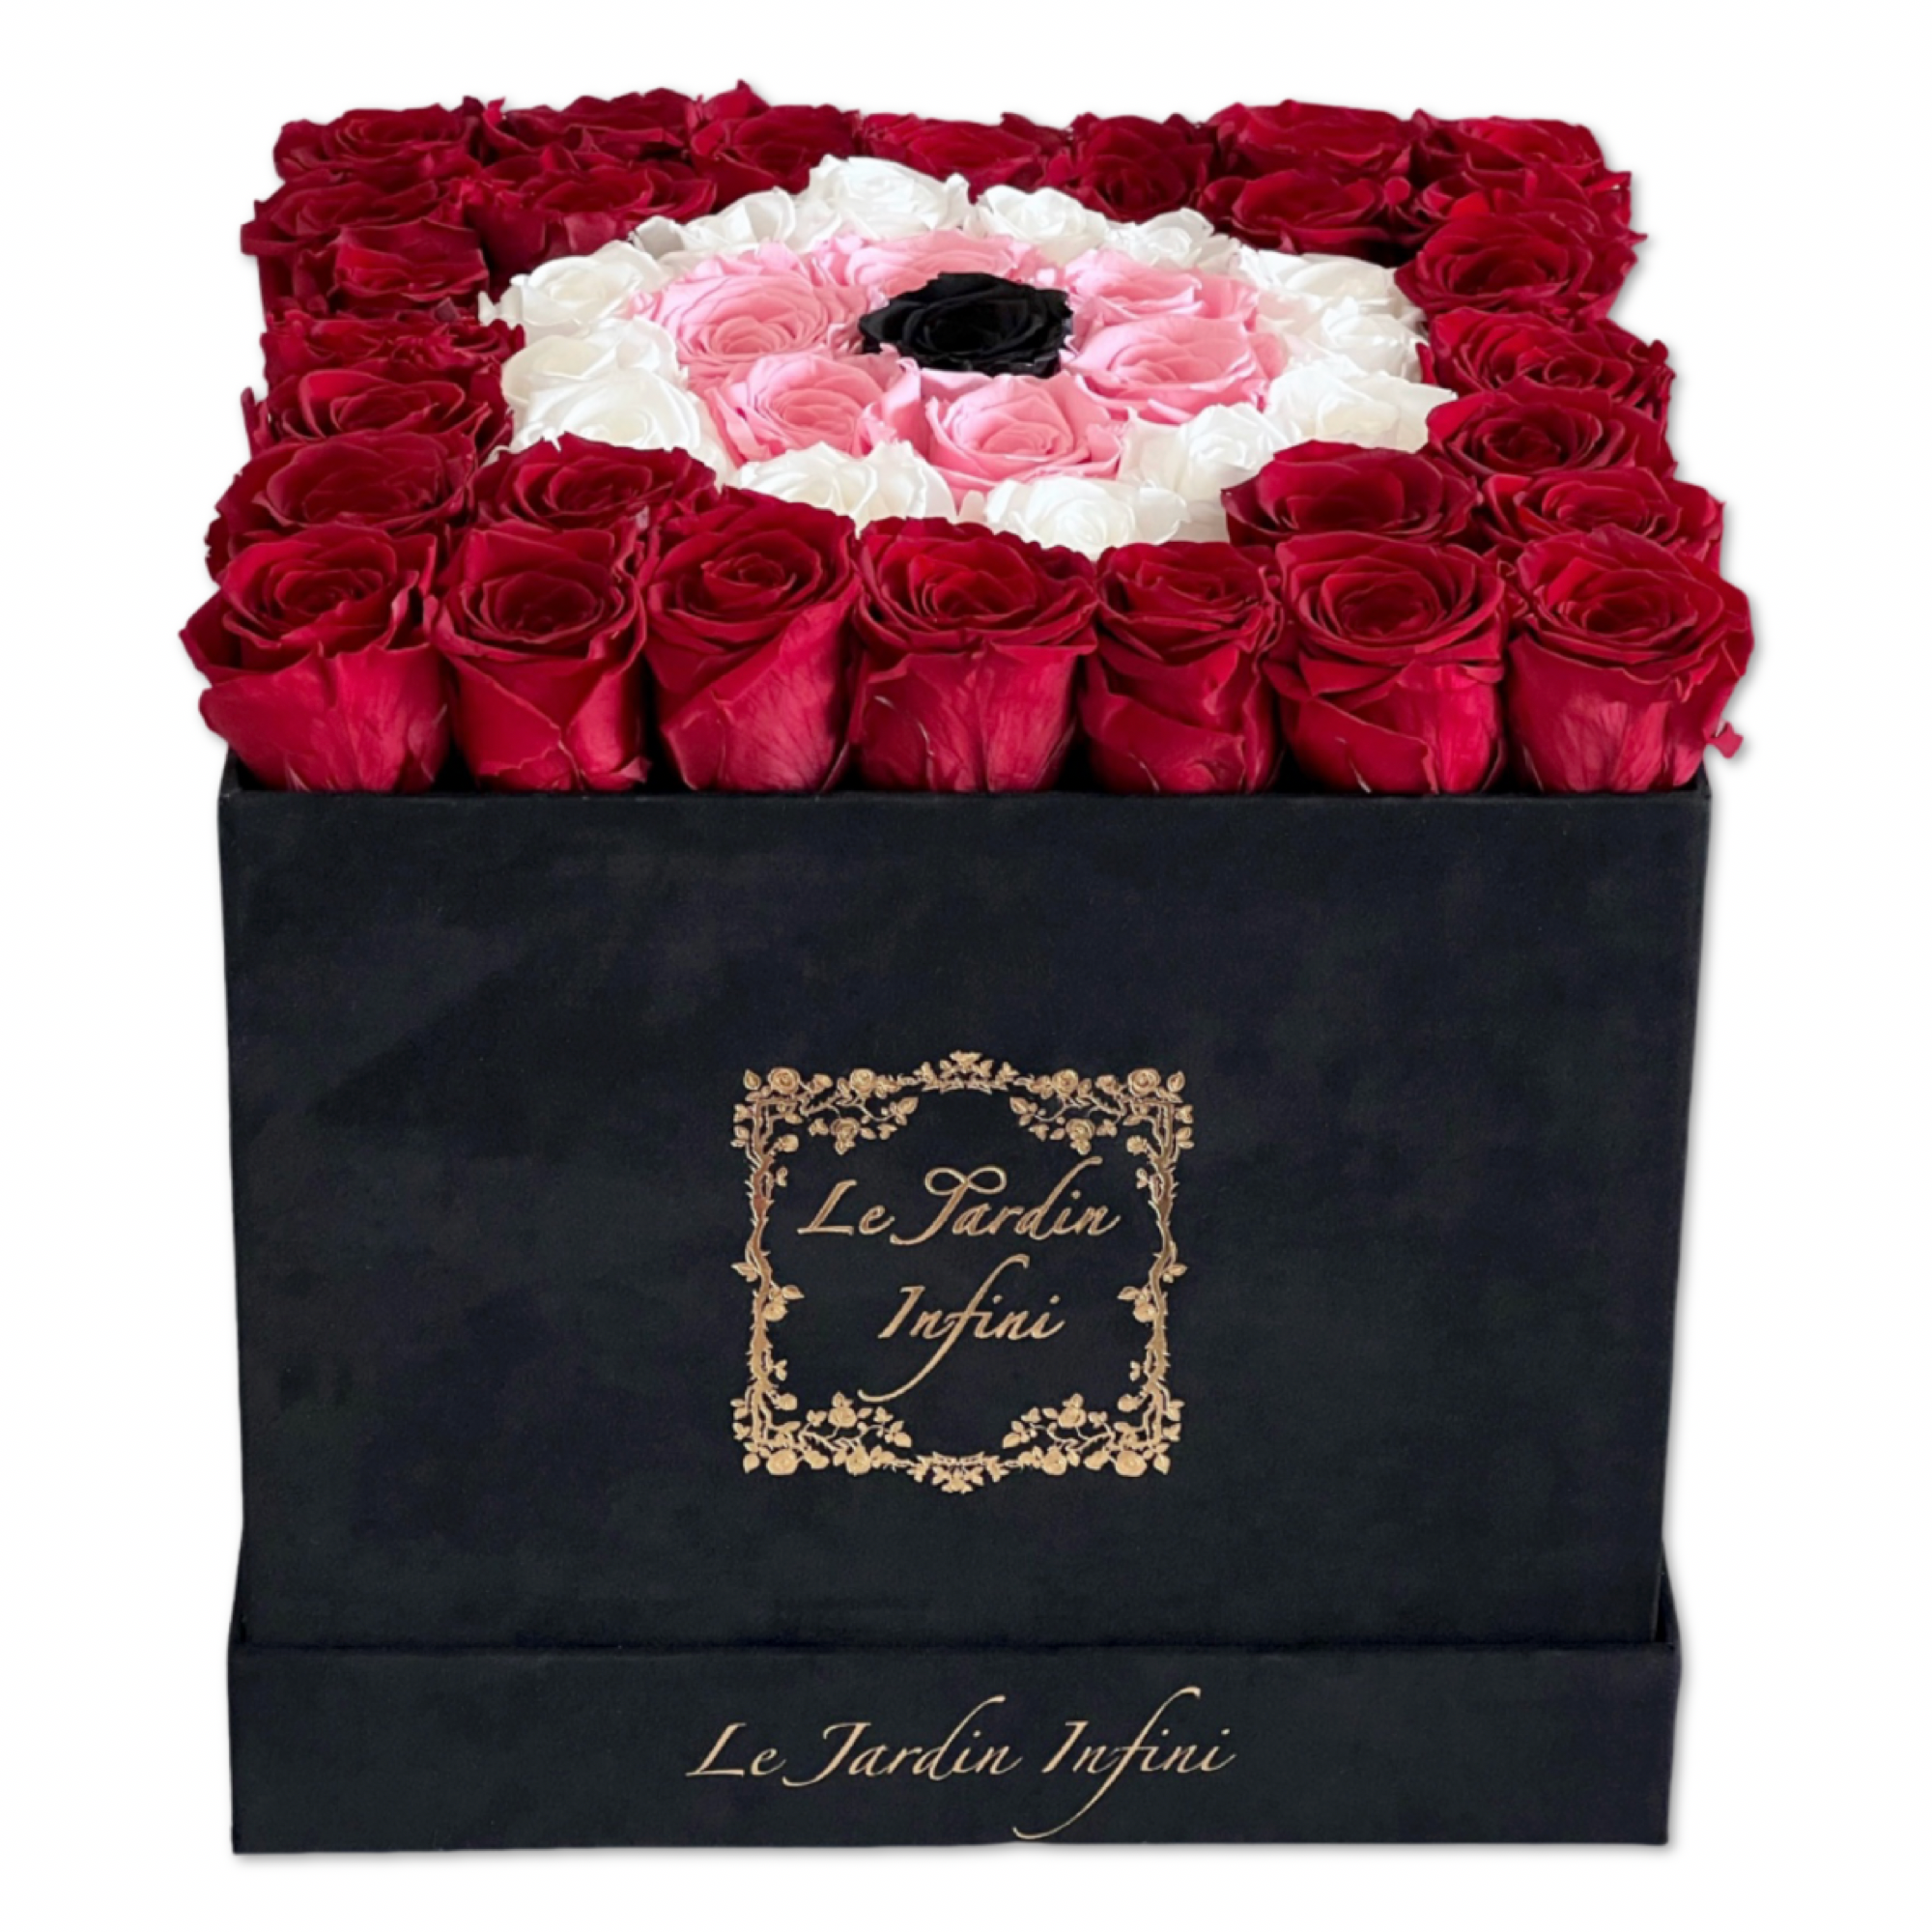 Red Evil Eye- Deep Red, White, Soft Pink and Black Preserved Roses-Large Square Luxury Black Suede Box